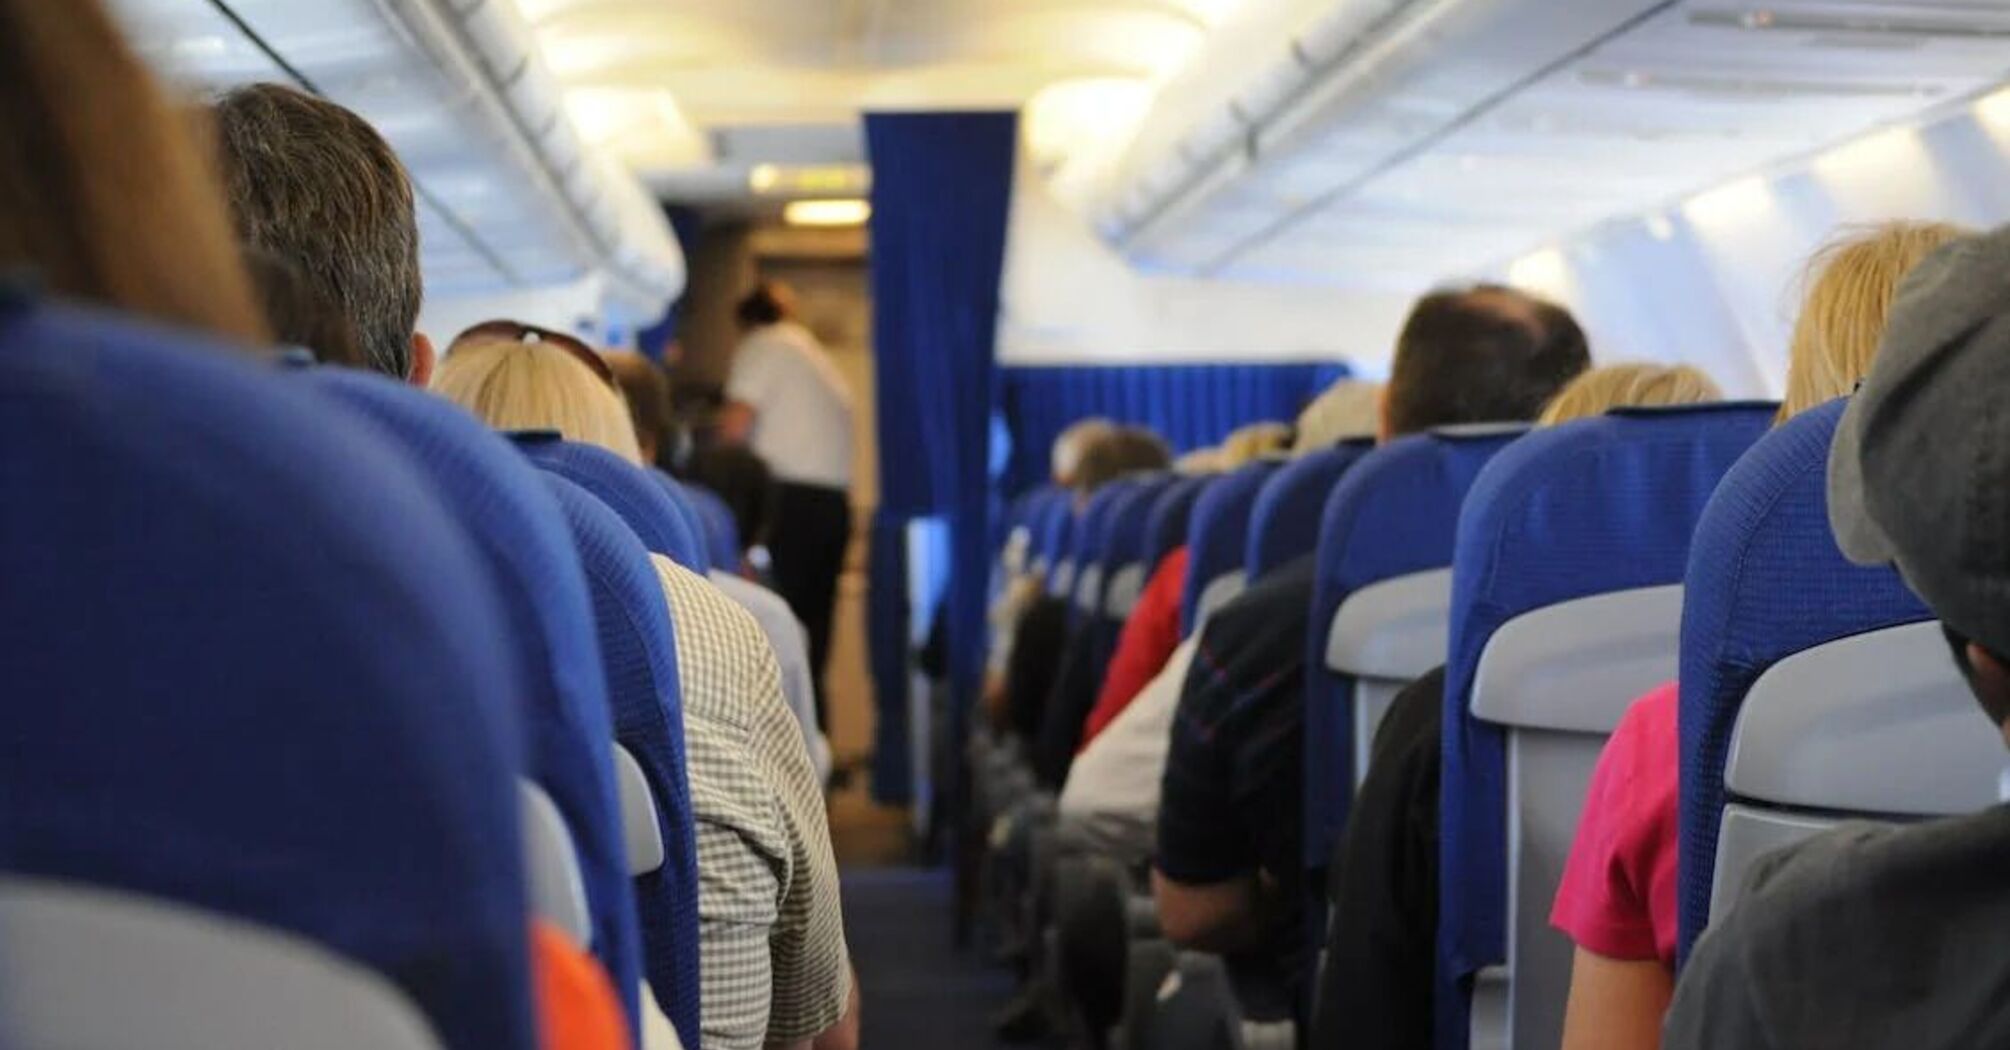 Experts have shared how to cope with turbulence